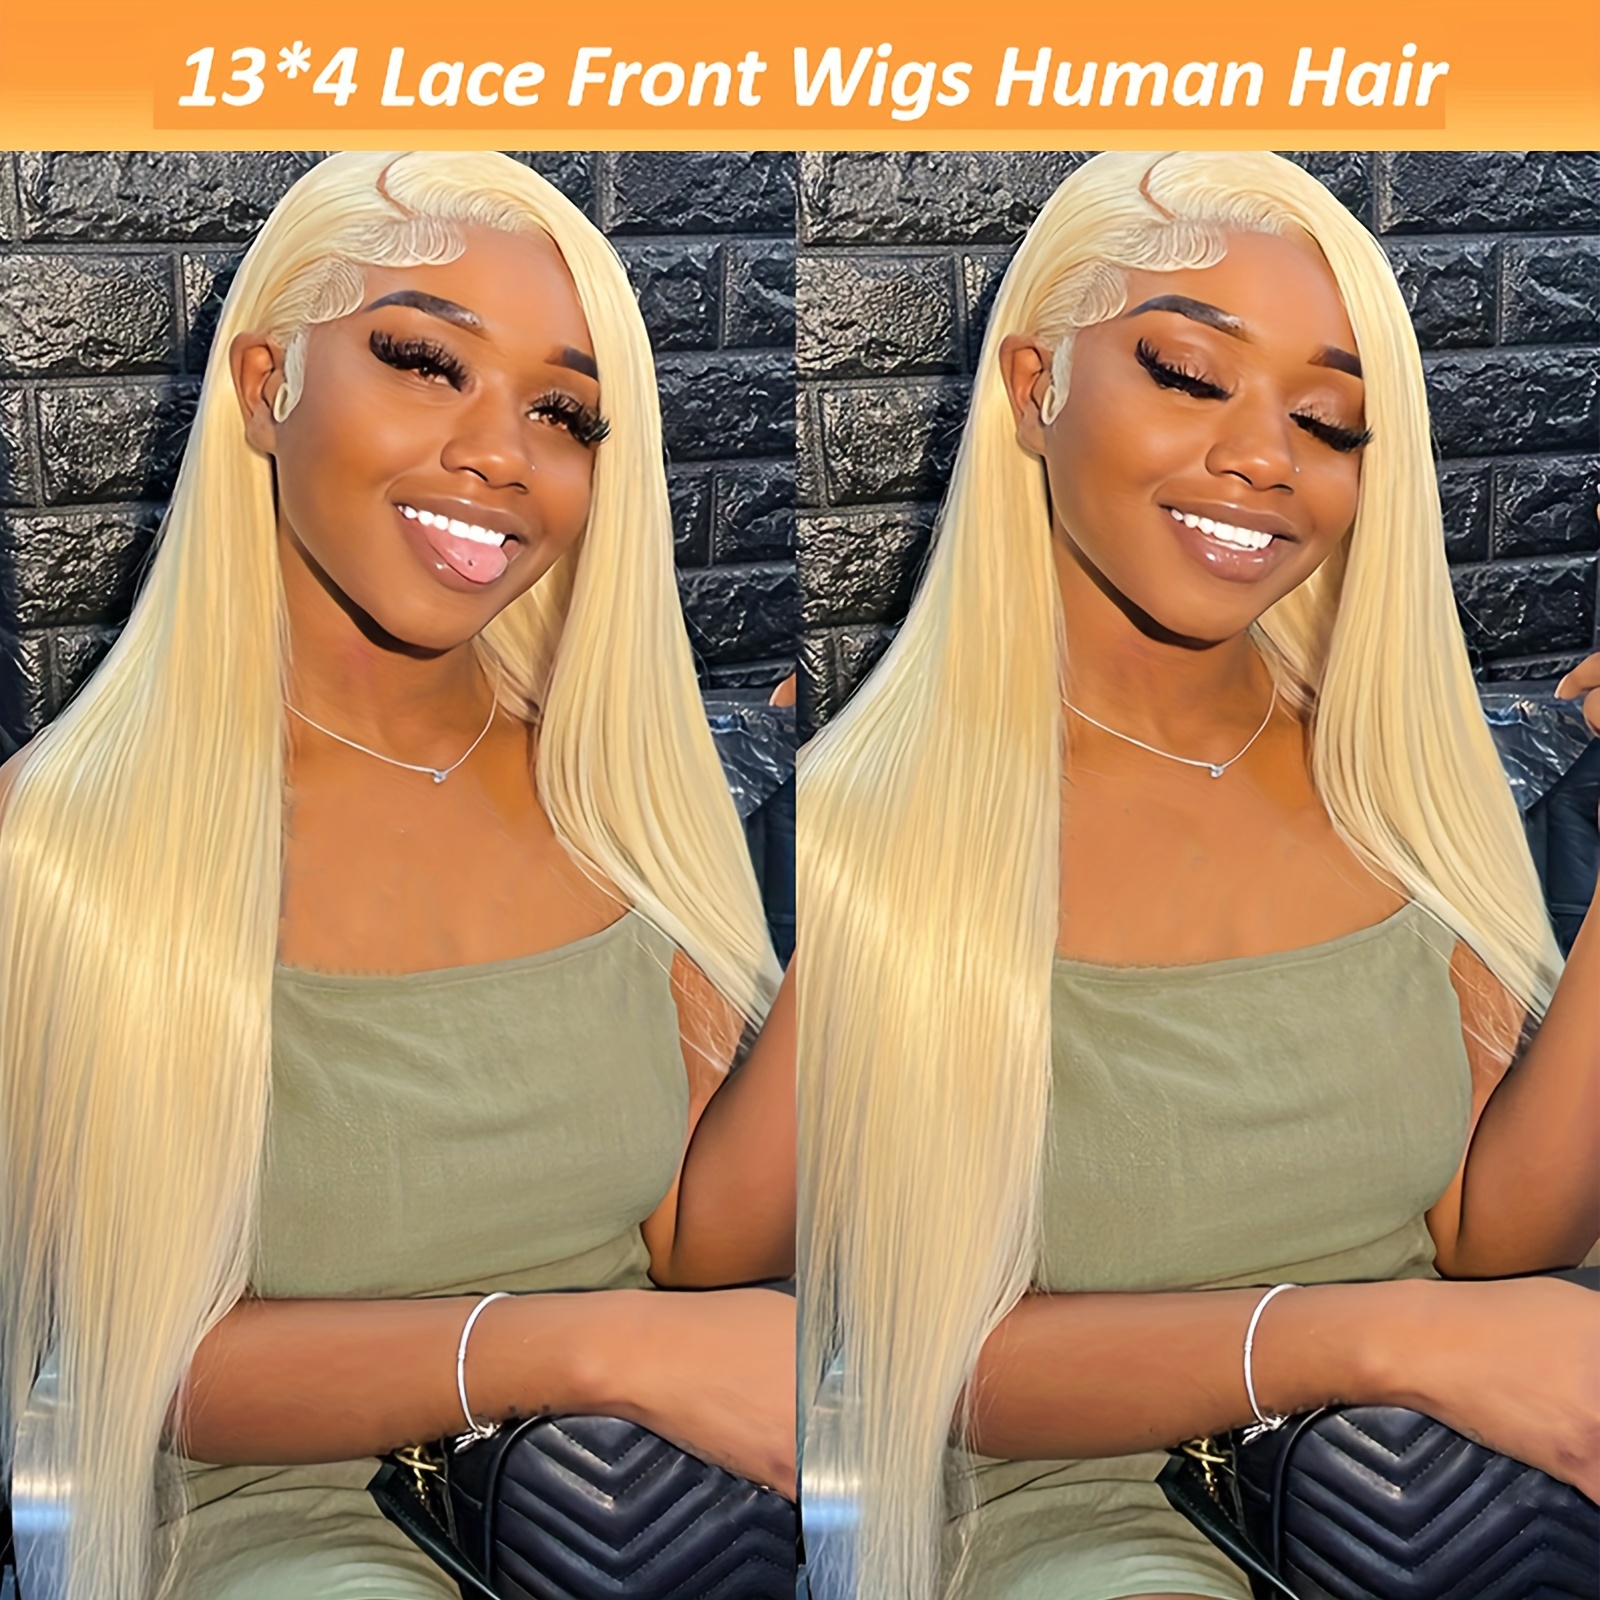 

200% Density 13*4 Lace Front Human Hair Wig Straight 613 Blonde 13x4 Lace Front Hair Wigs Hd Transparent Human Hair Wigs For Women Girls 20-34 Inch